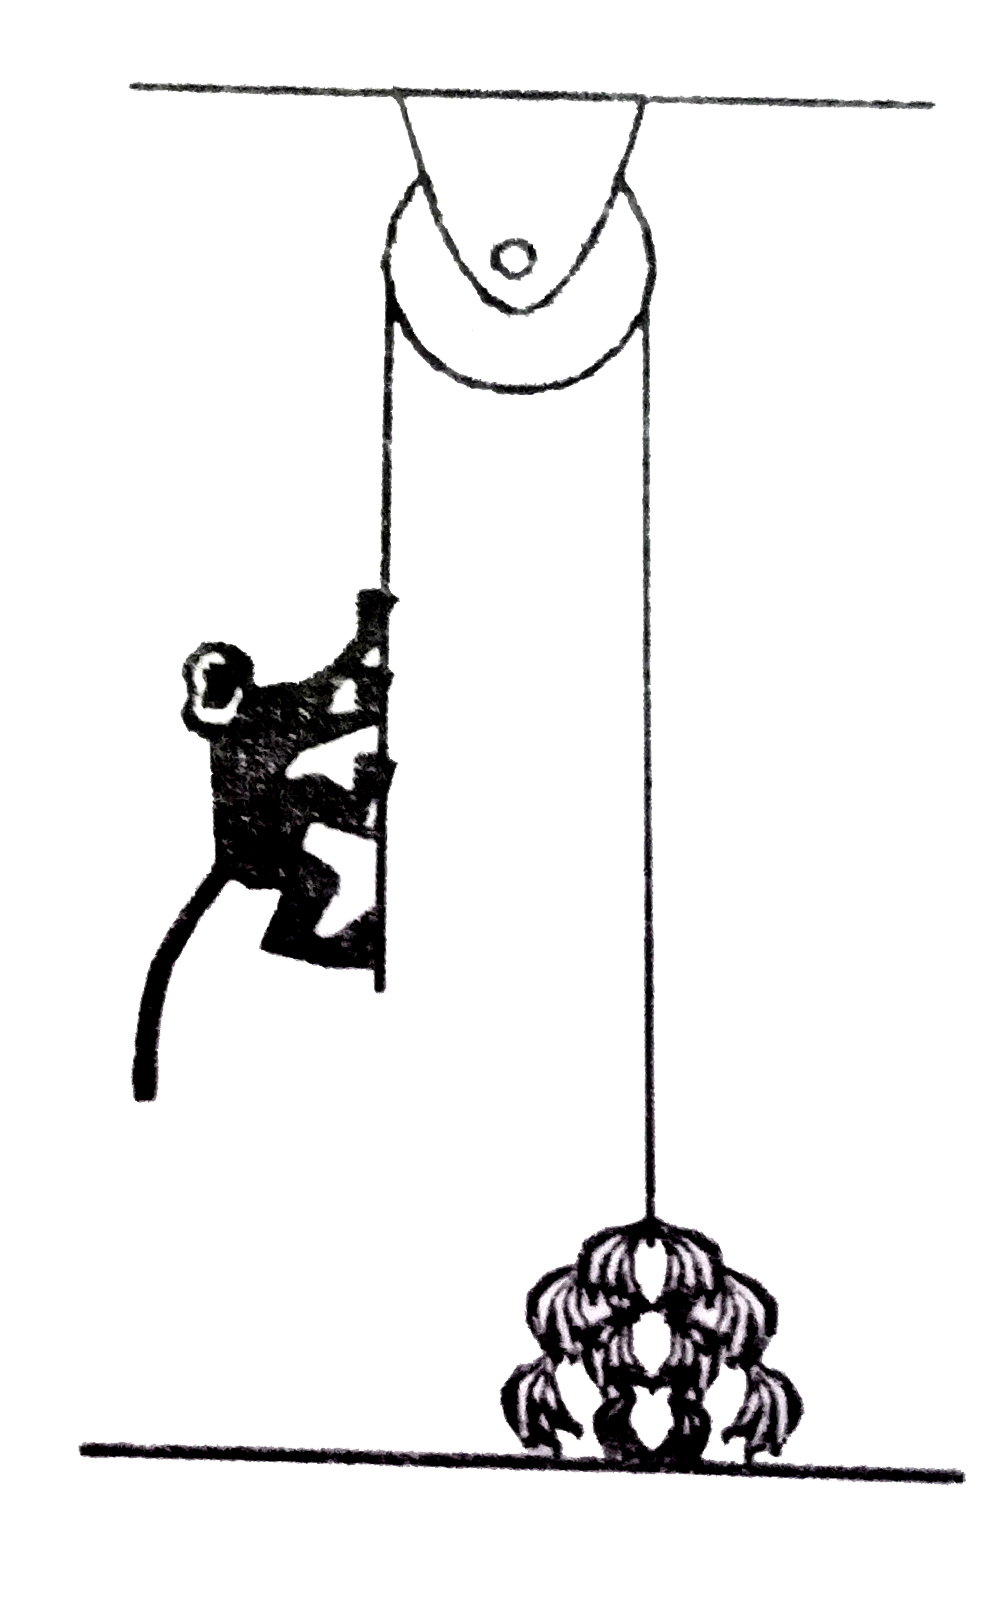 As shown in figure a monkey of 20g mass is holding a light rope that passes over a frictionless pulley. A bunch of bananas of the same mass is tied to the other end of rope. Inorder to get access to the bunch the monkey starts climbing the rope. The distance between the monkey and the bananas is